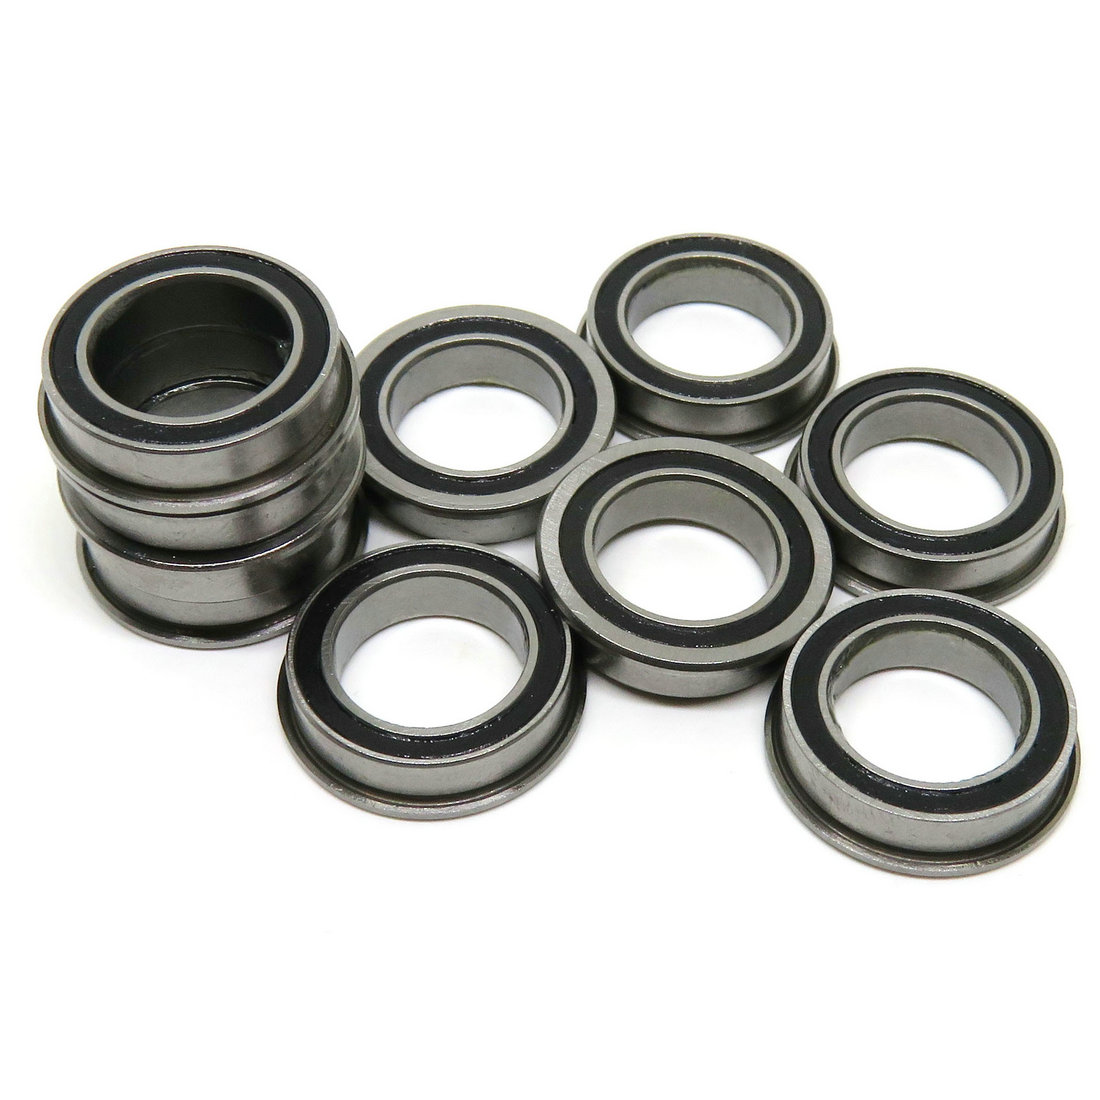 F6700-2RS rubber sealed flanged ball bearings 10x15x4mm.jpg